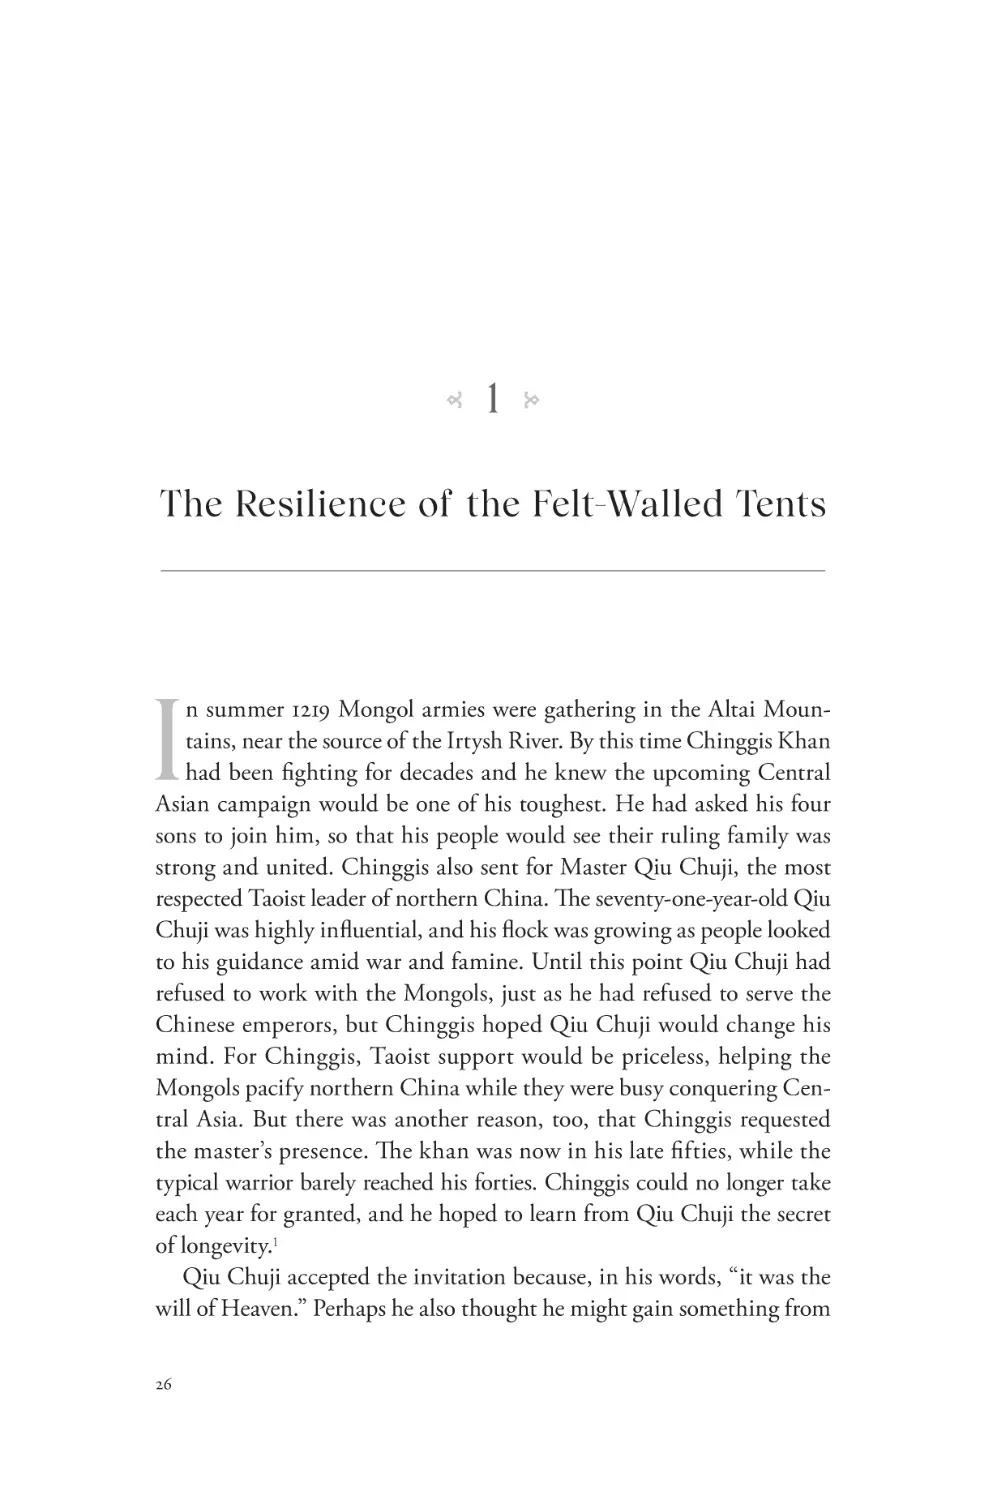 1. The Resilience of the Felt-Walled Tents